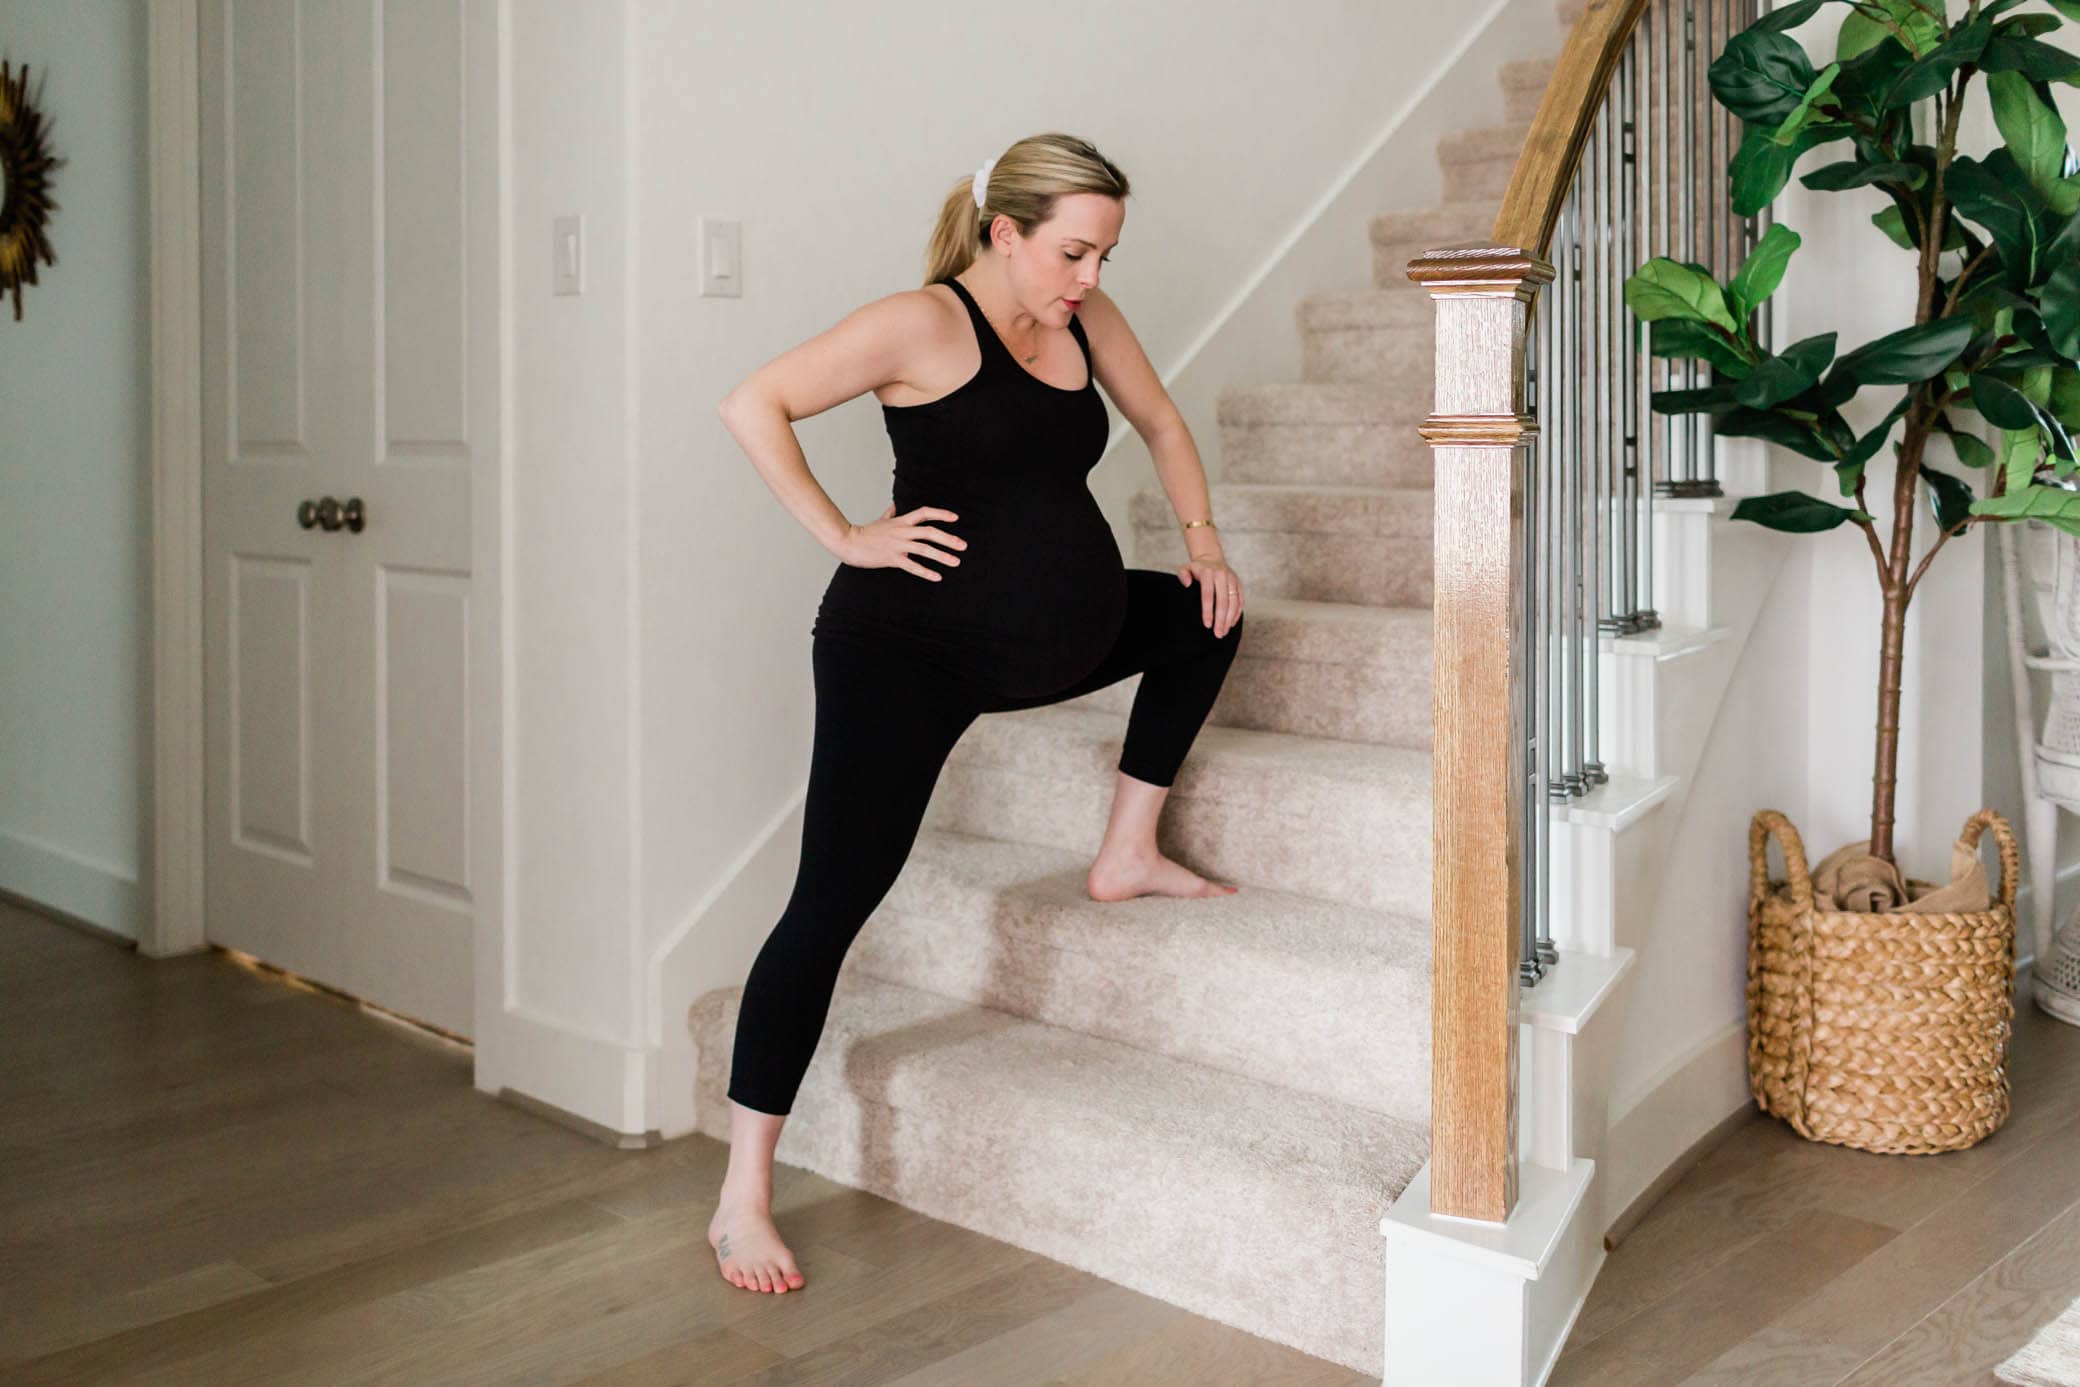 Pregnant woman lunging on the staircase.